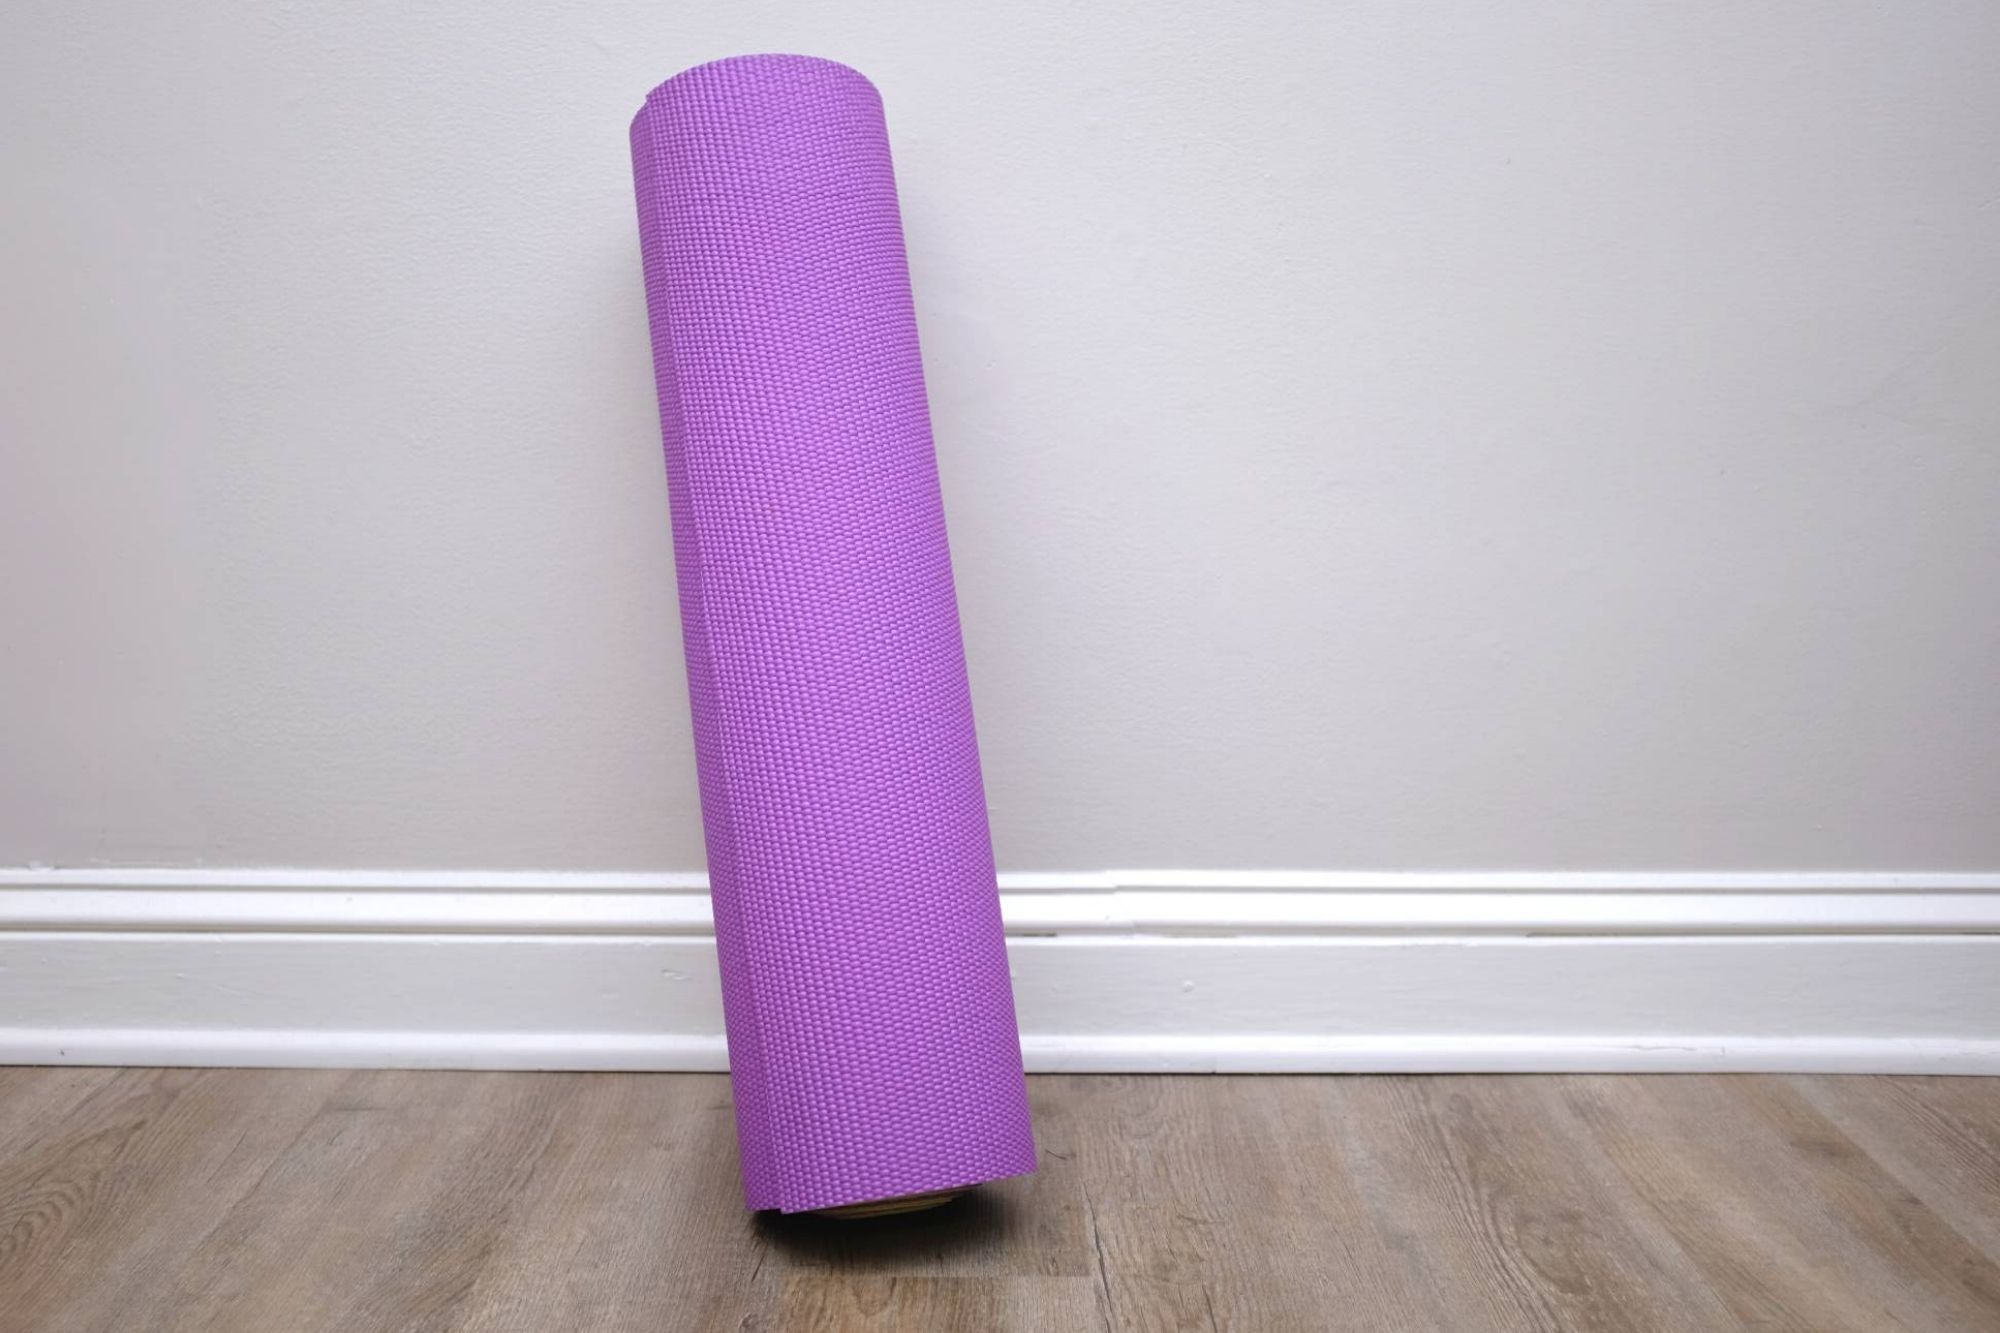 a purple yoga mat rolled up and leaning against a pale grey wall